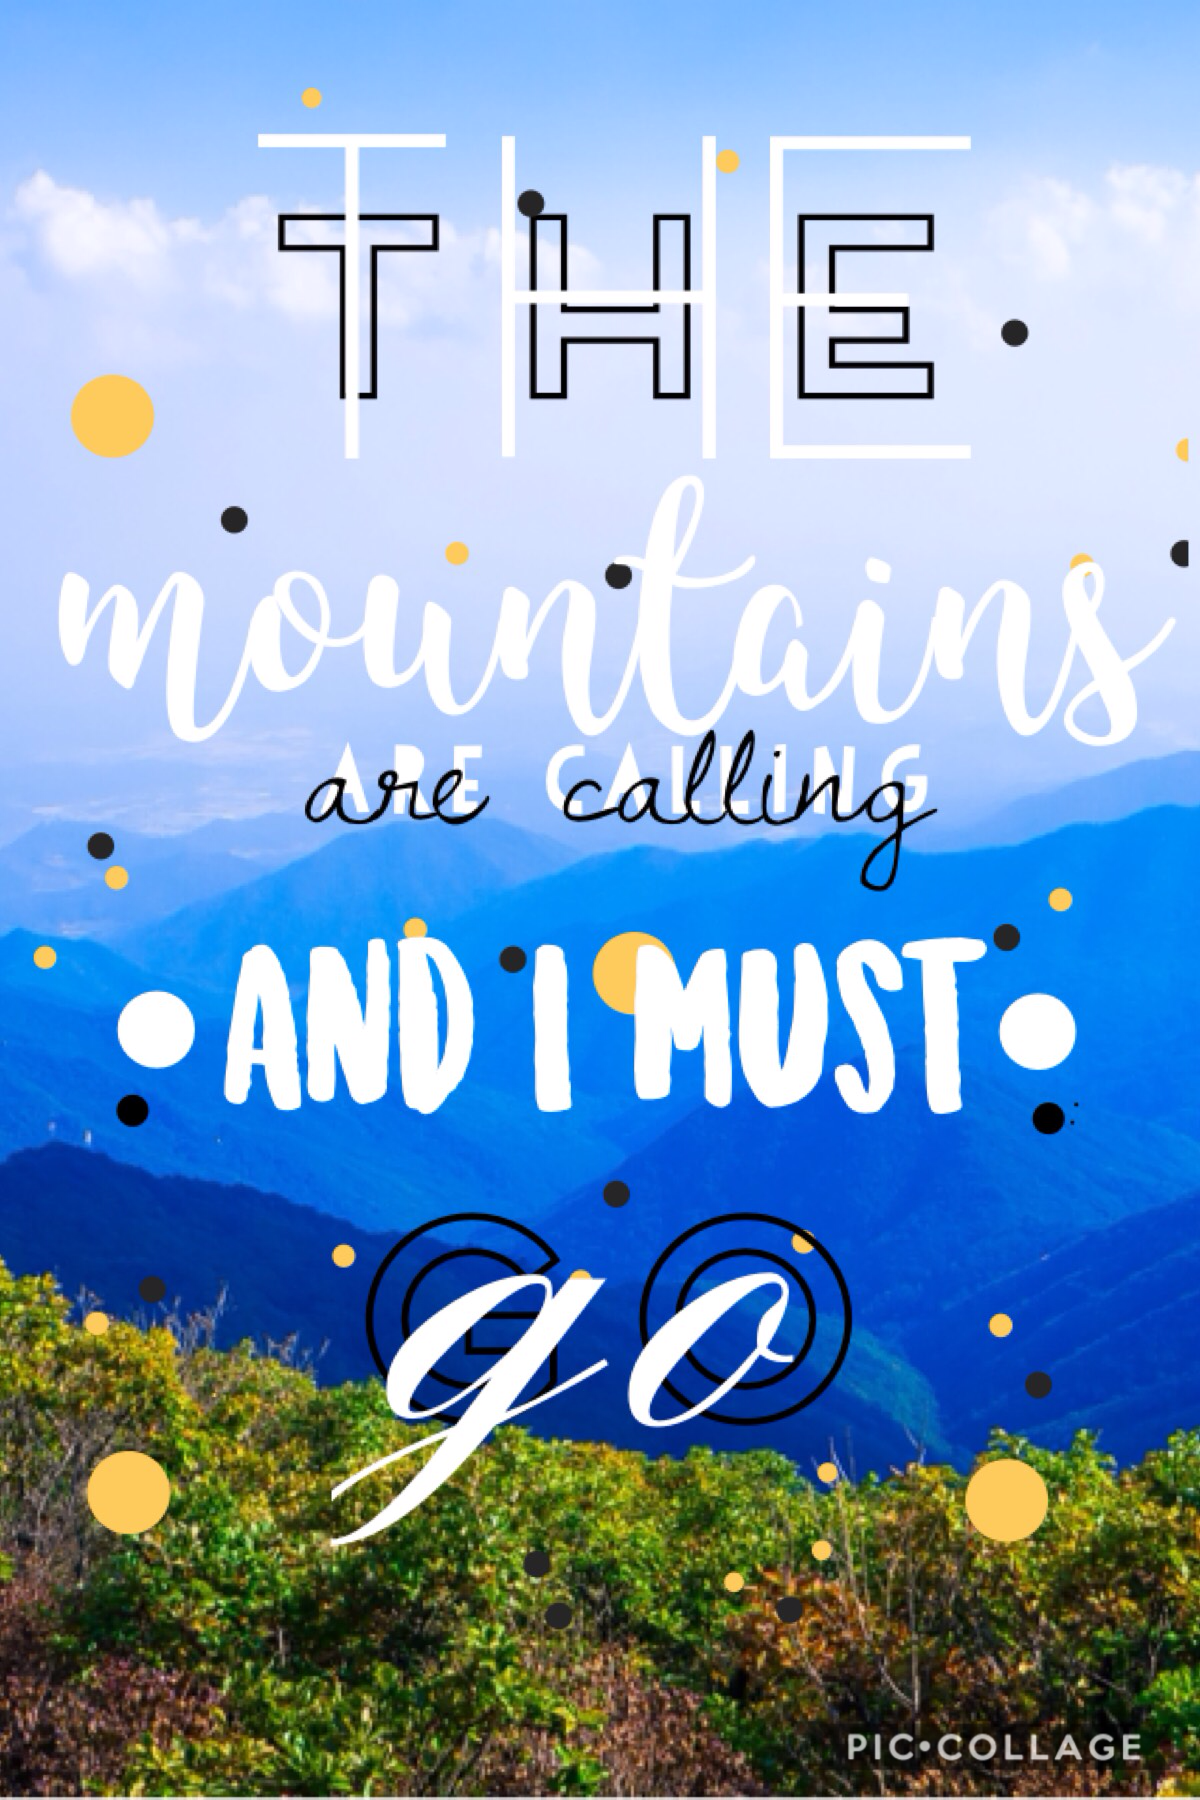 ~Like if you love the mountains!~